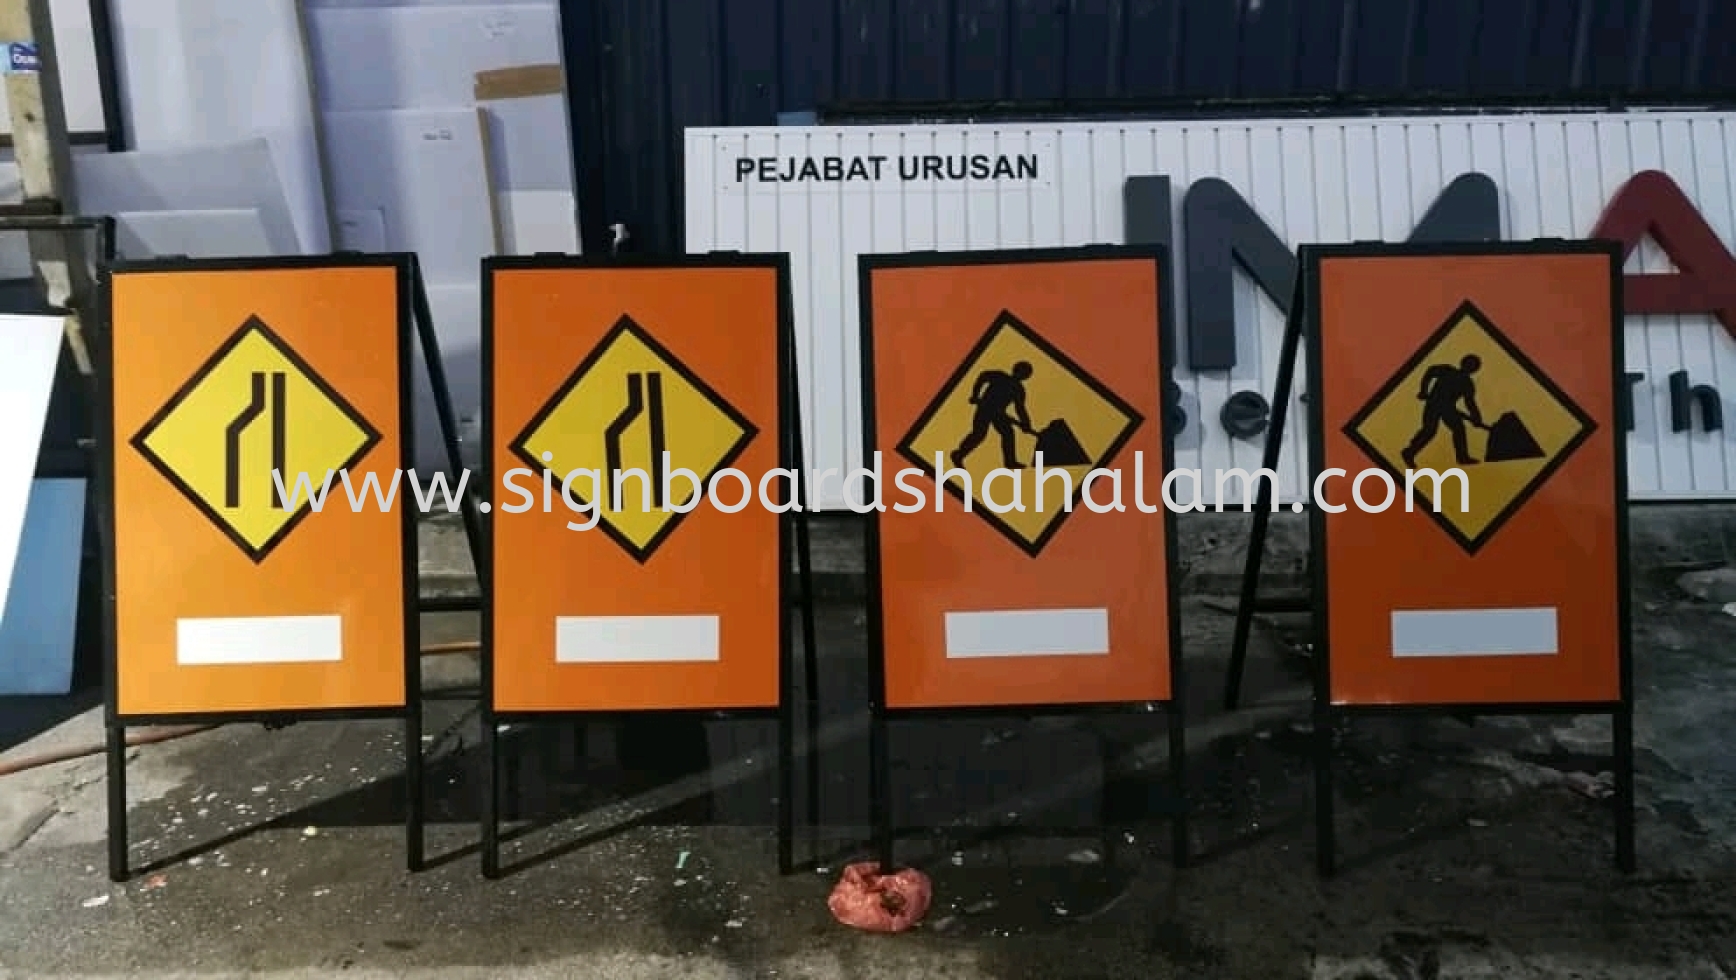 Prosafety Resources Klang - A board Stand